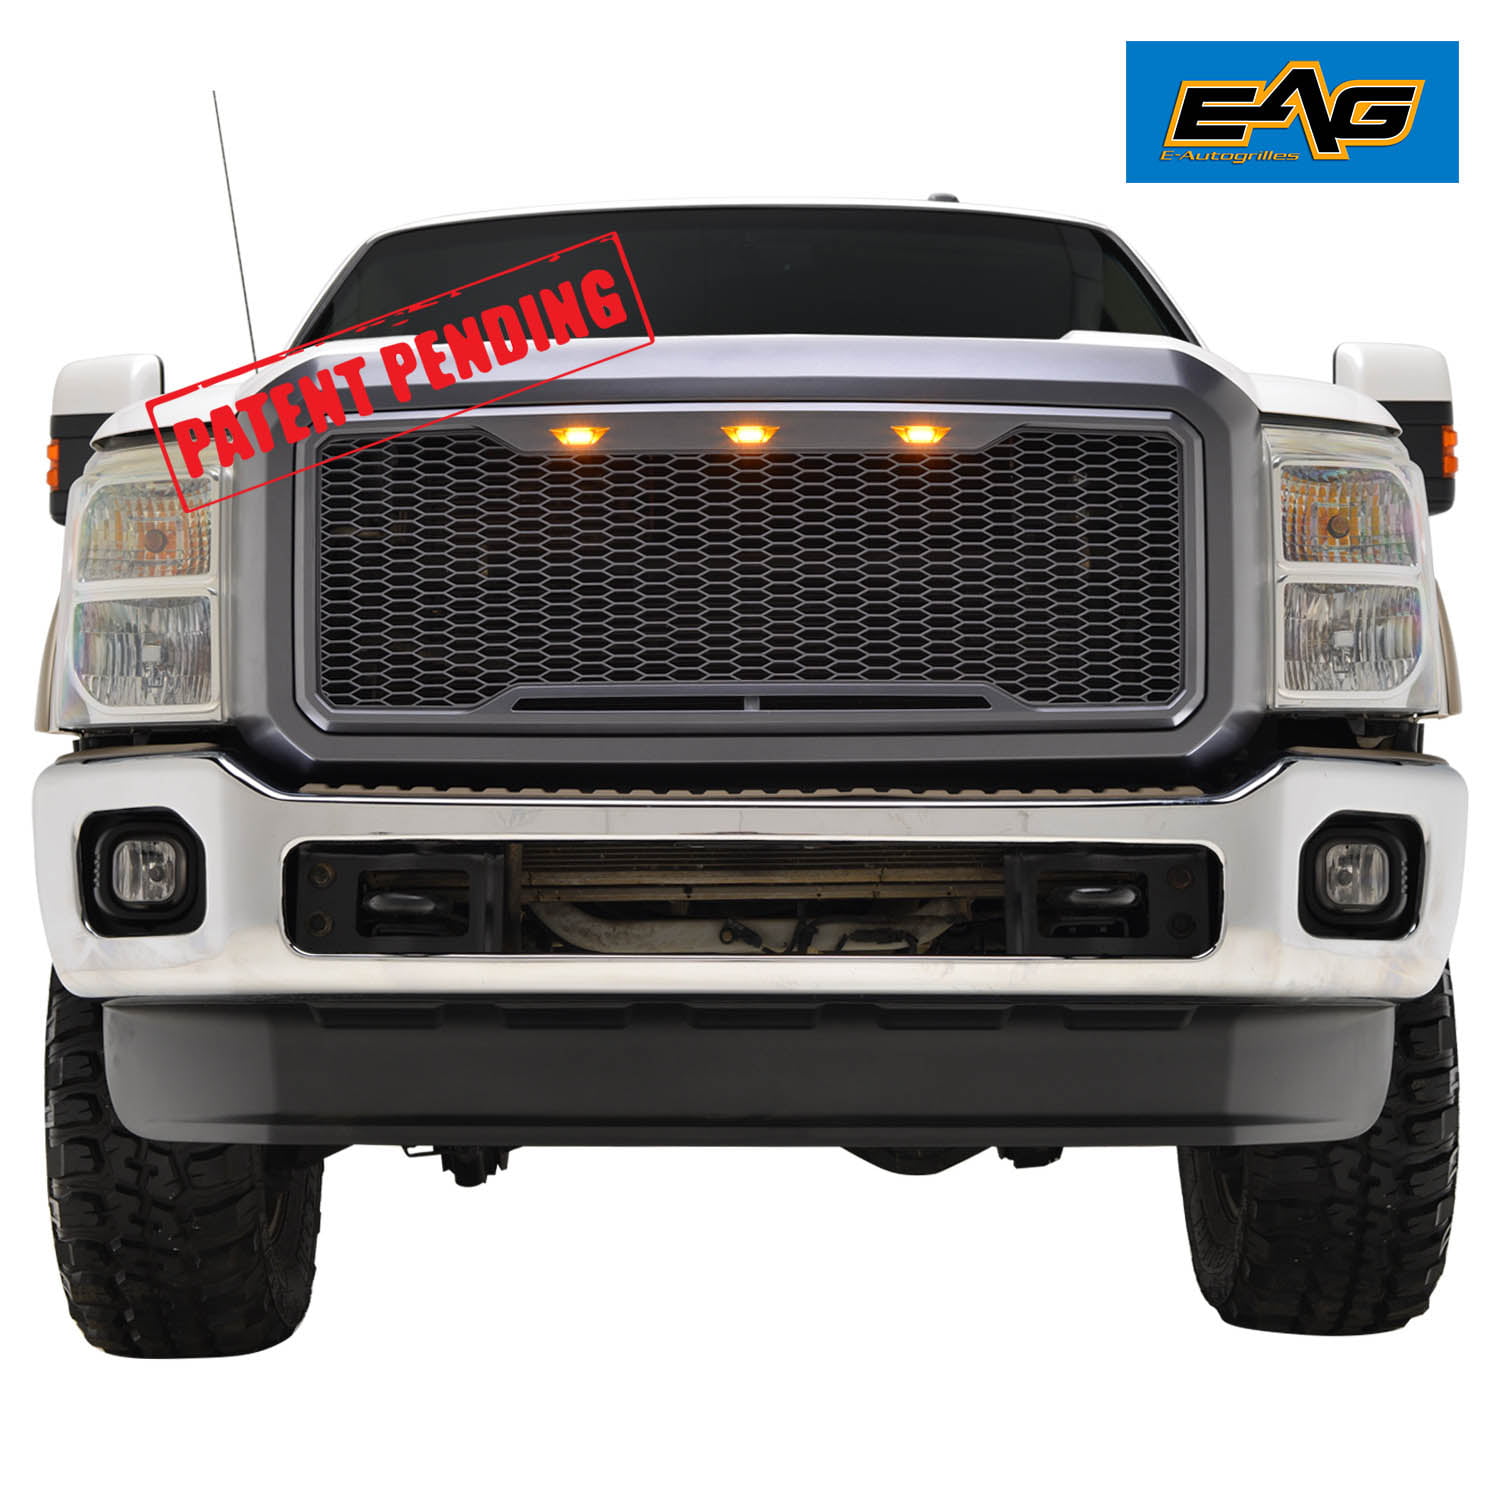 EAG Replacement Upper Grille Front Grill with Amber LED Lights for